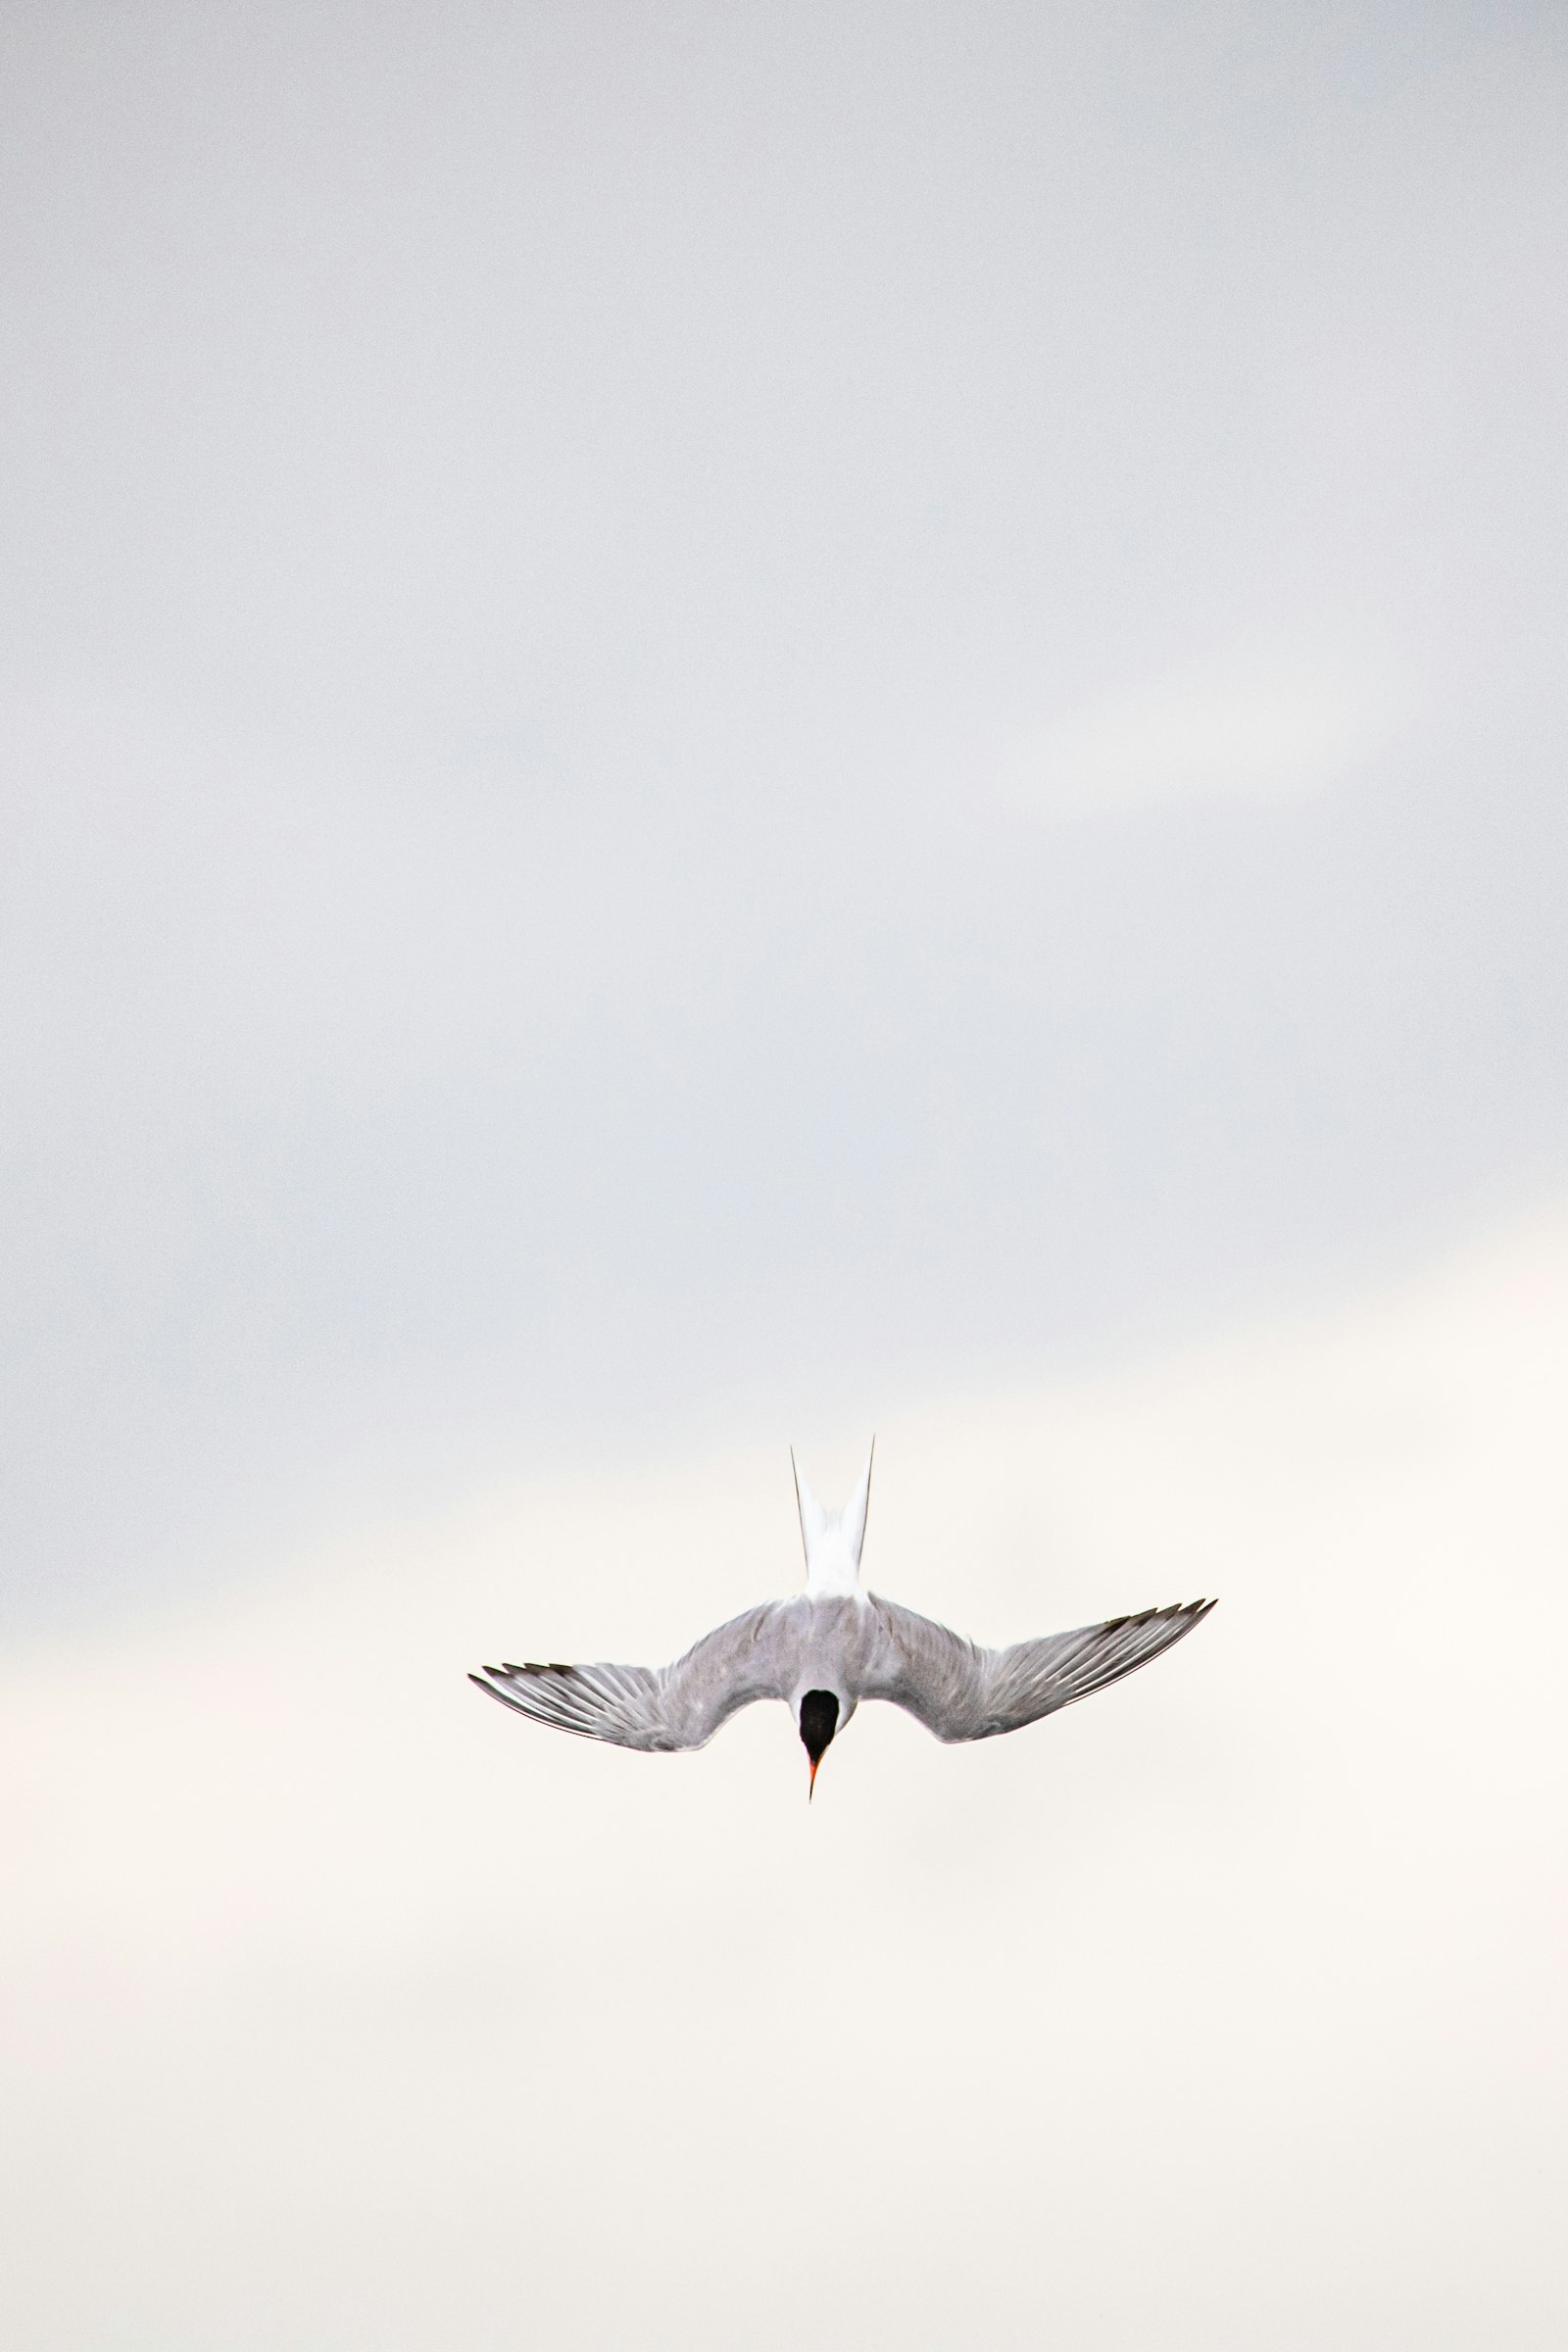 Sigma 150-600mm F5-6.3 DG OS HSM | C sample photo. White bird flying in photography